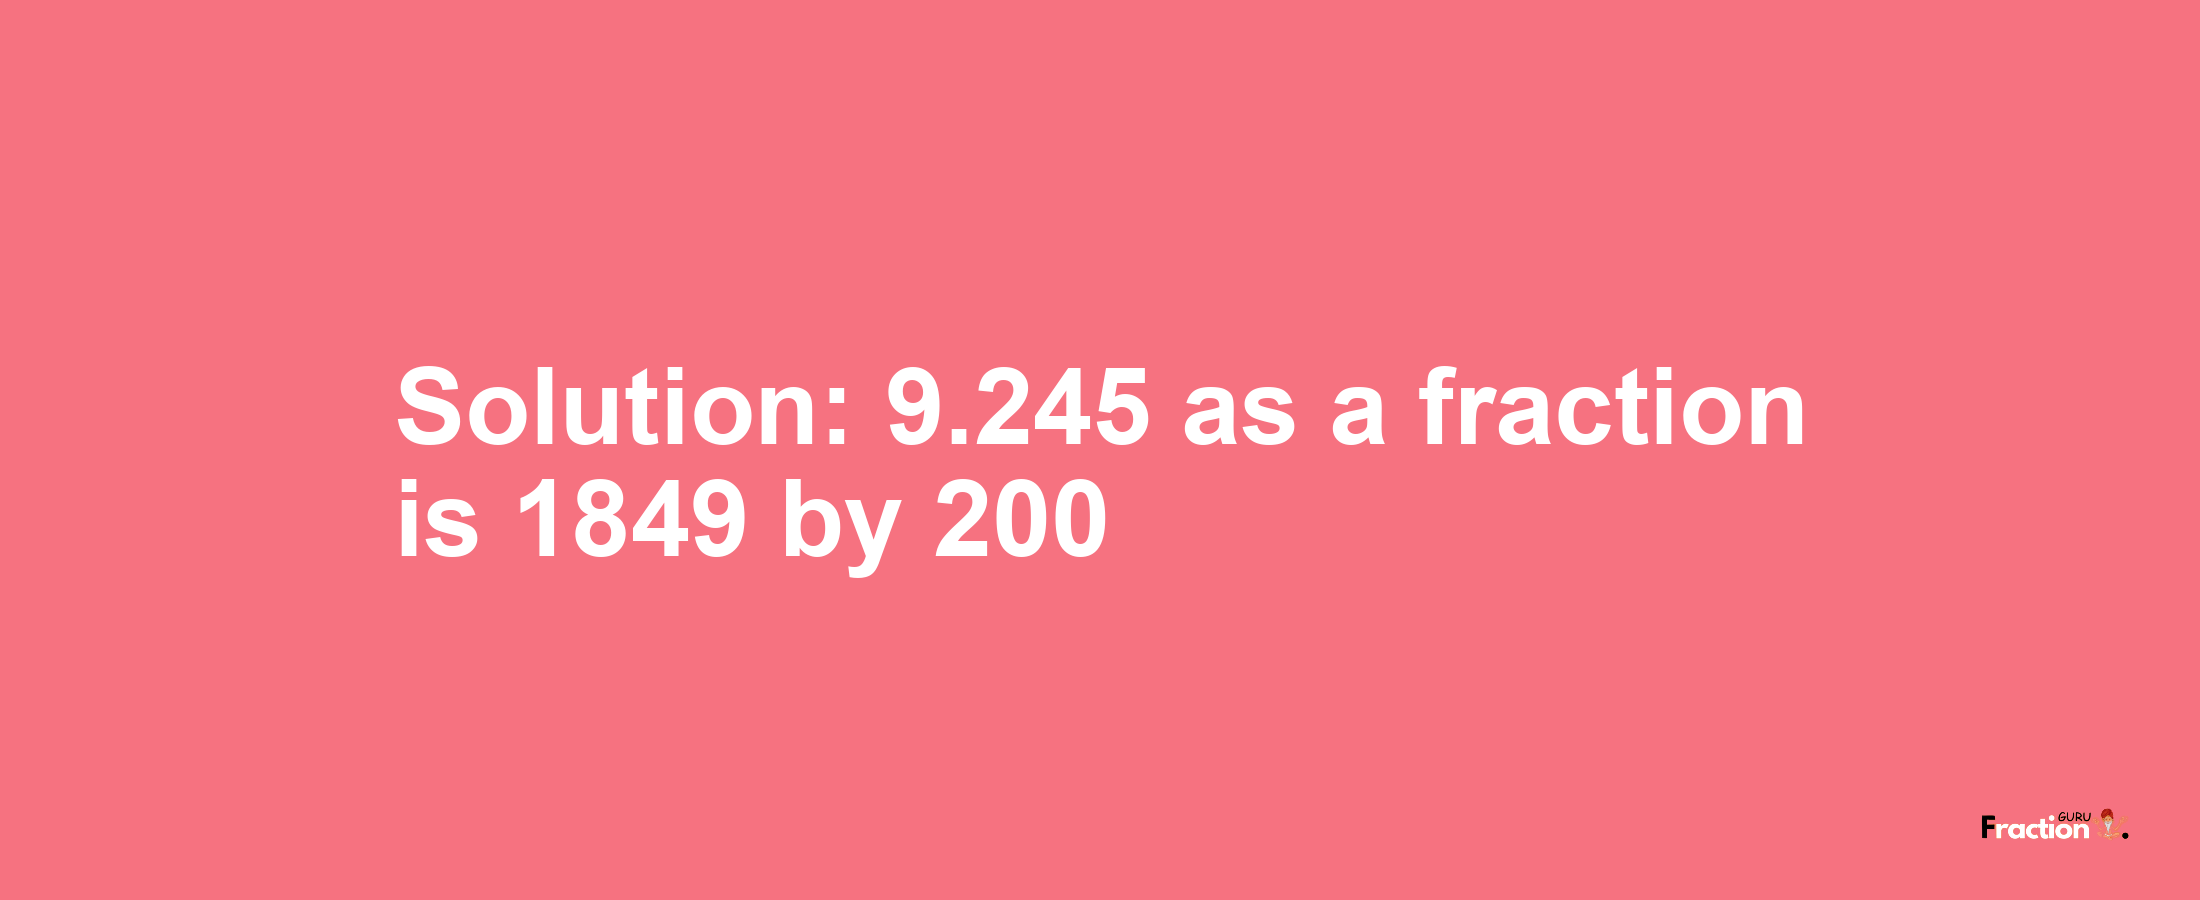 Solution:9.245 as a fraction is 1849/200